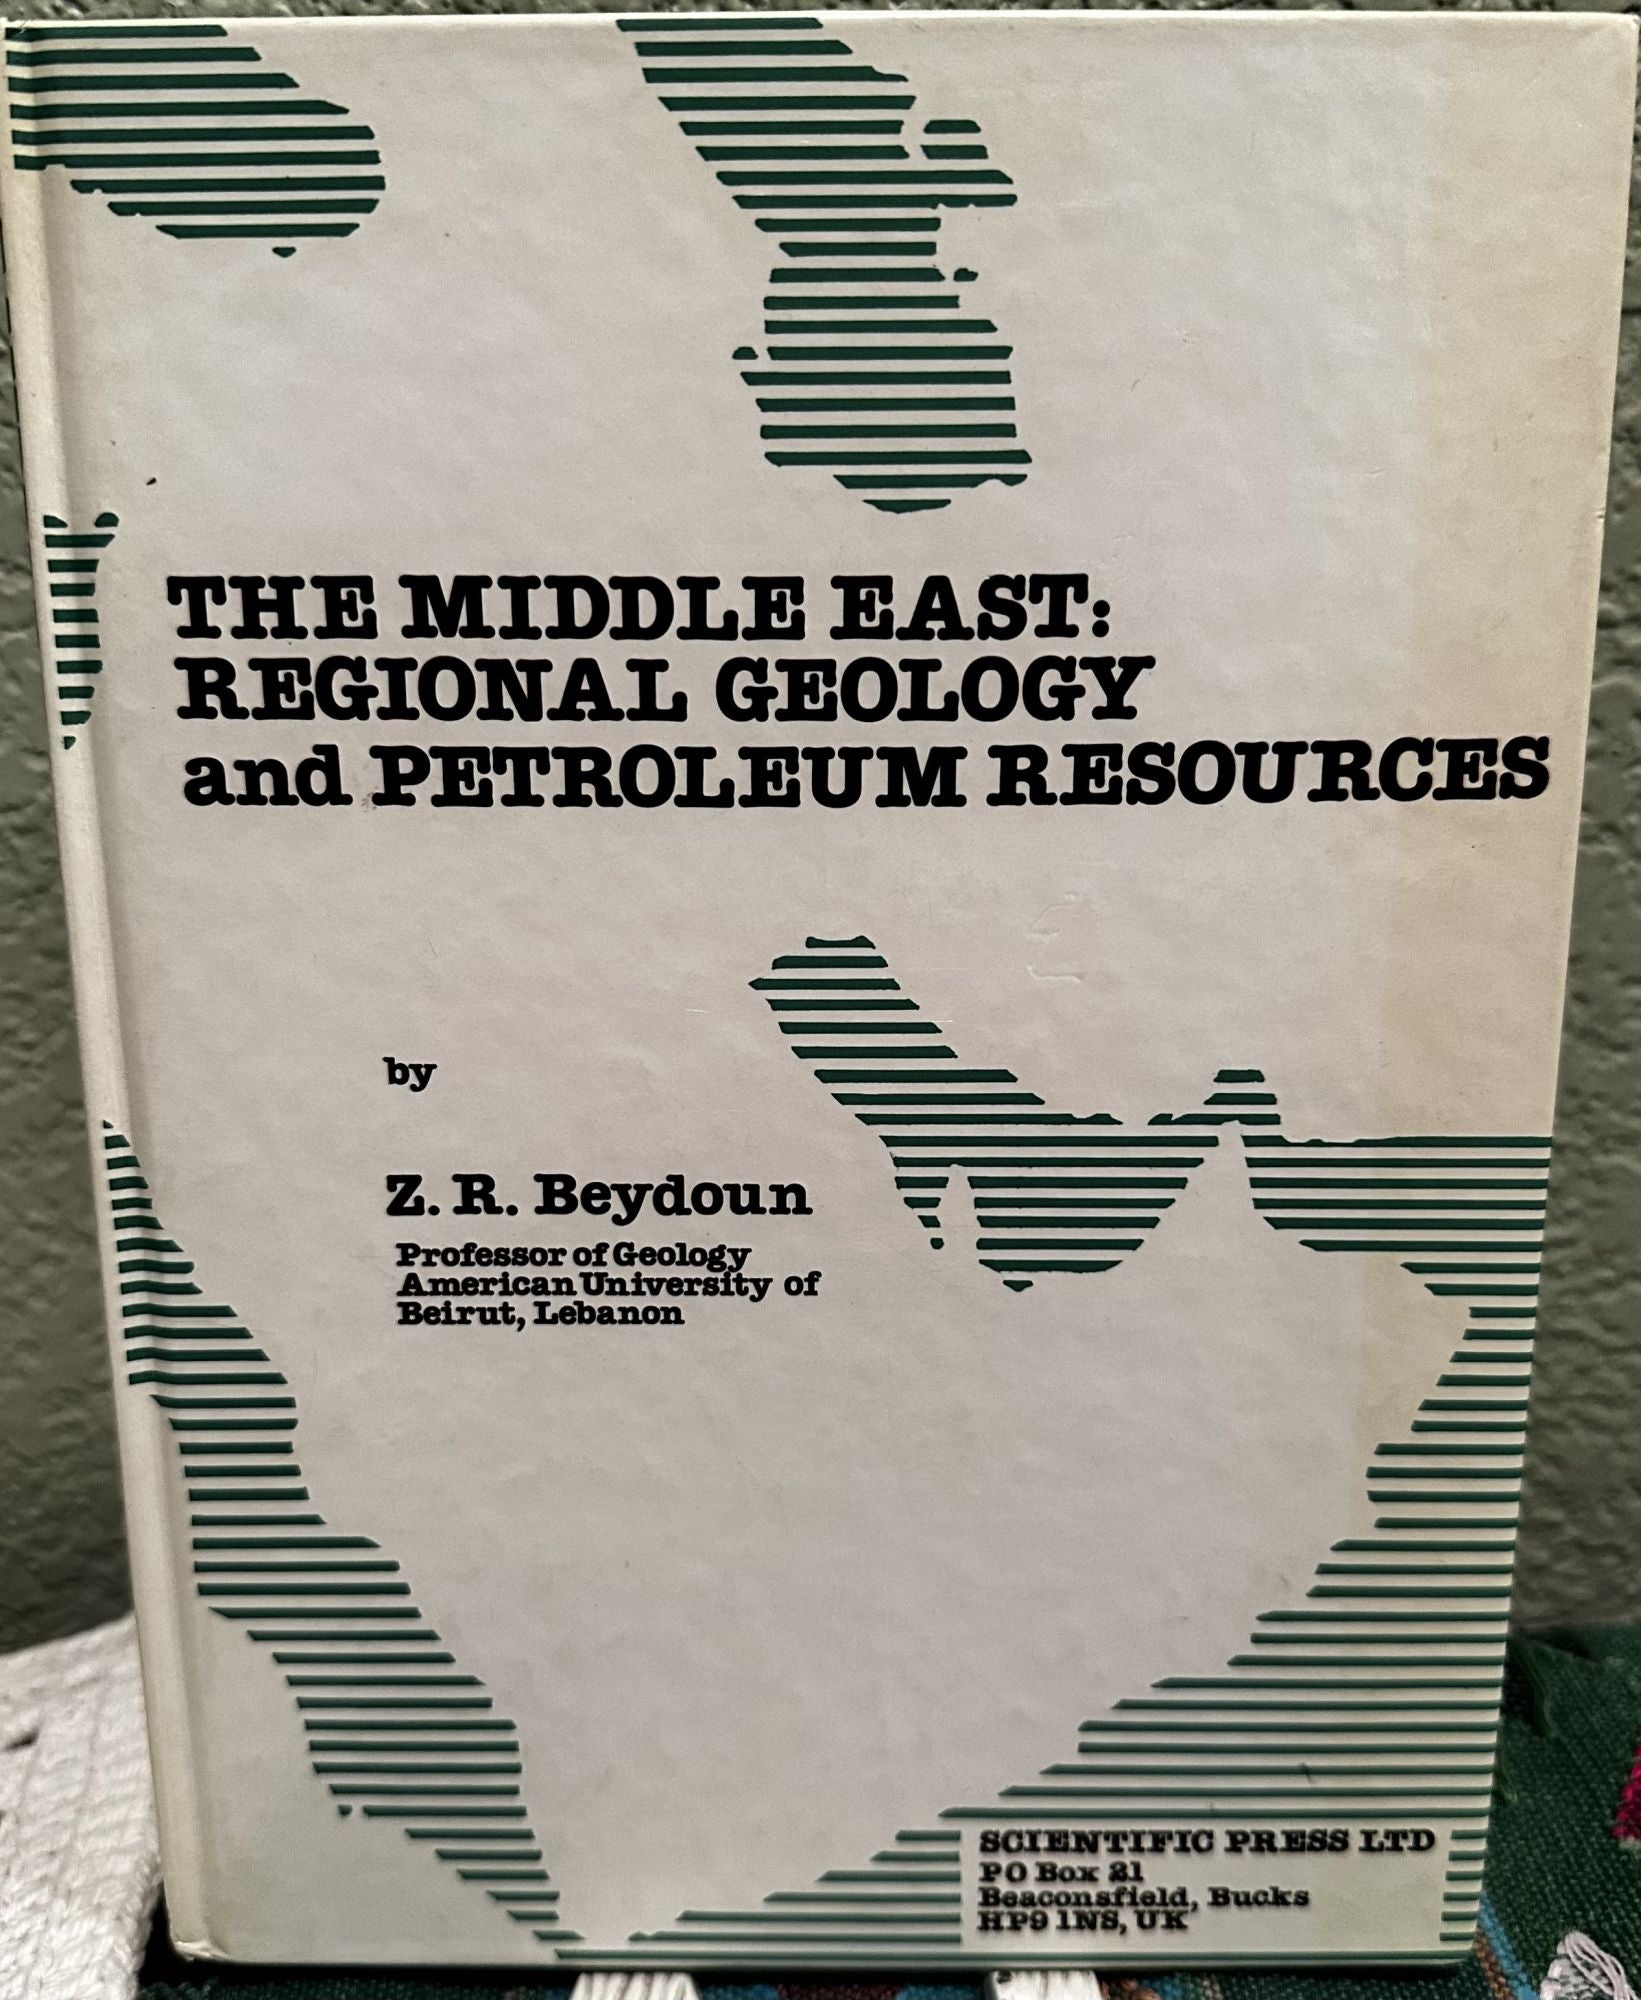 The Middle East: Regional Geology and Petroleum Resources. Z. R. Beydoun.